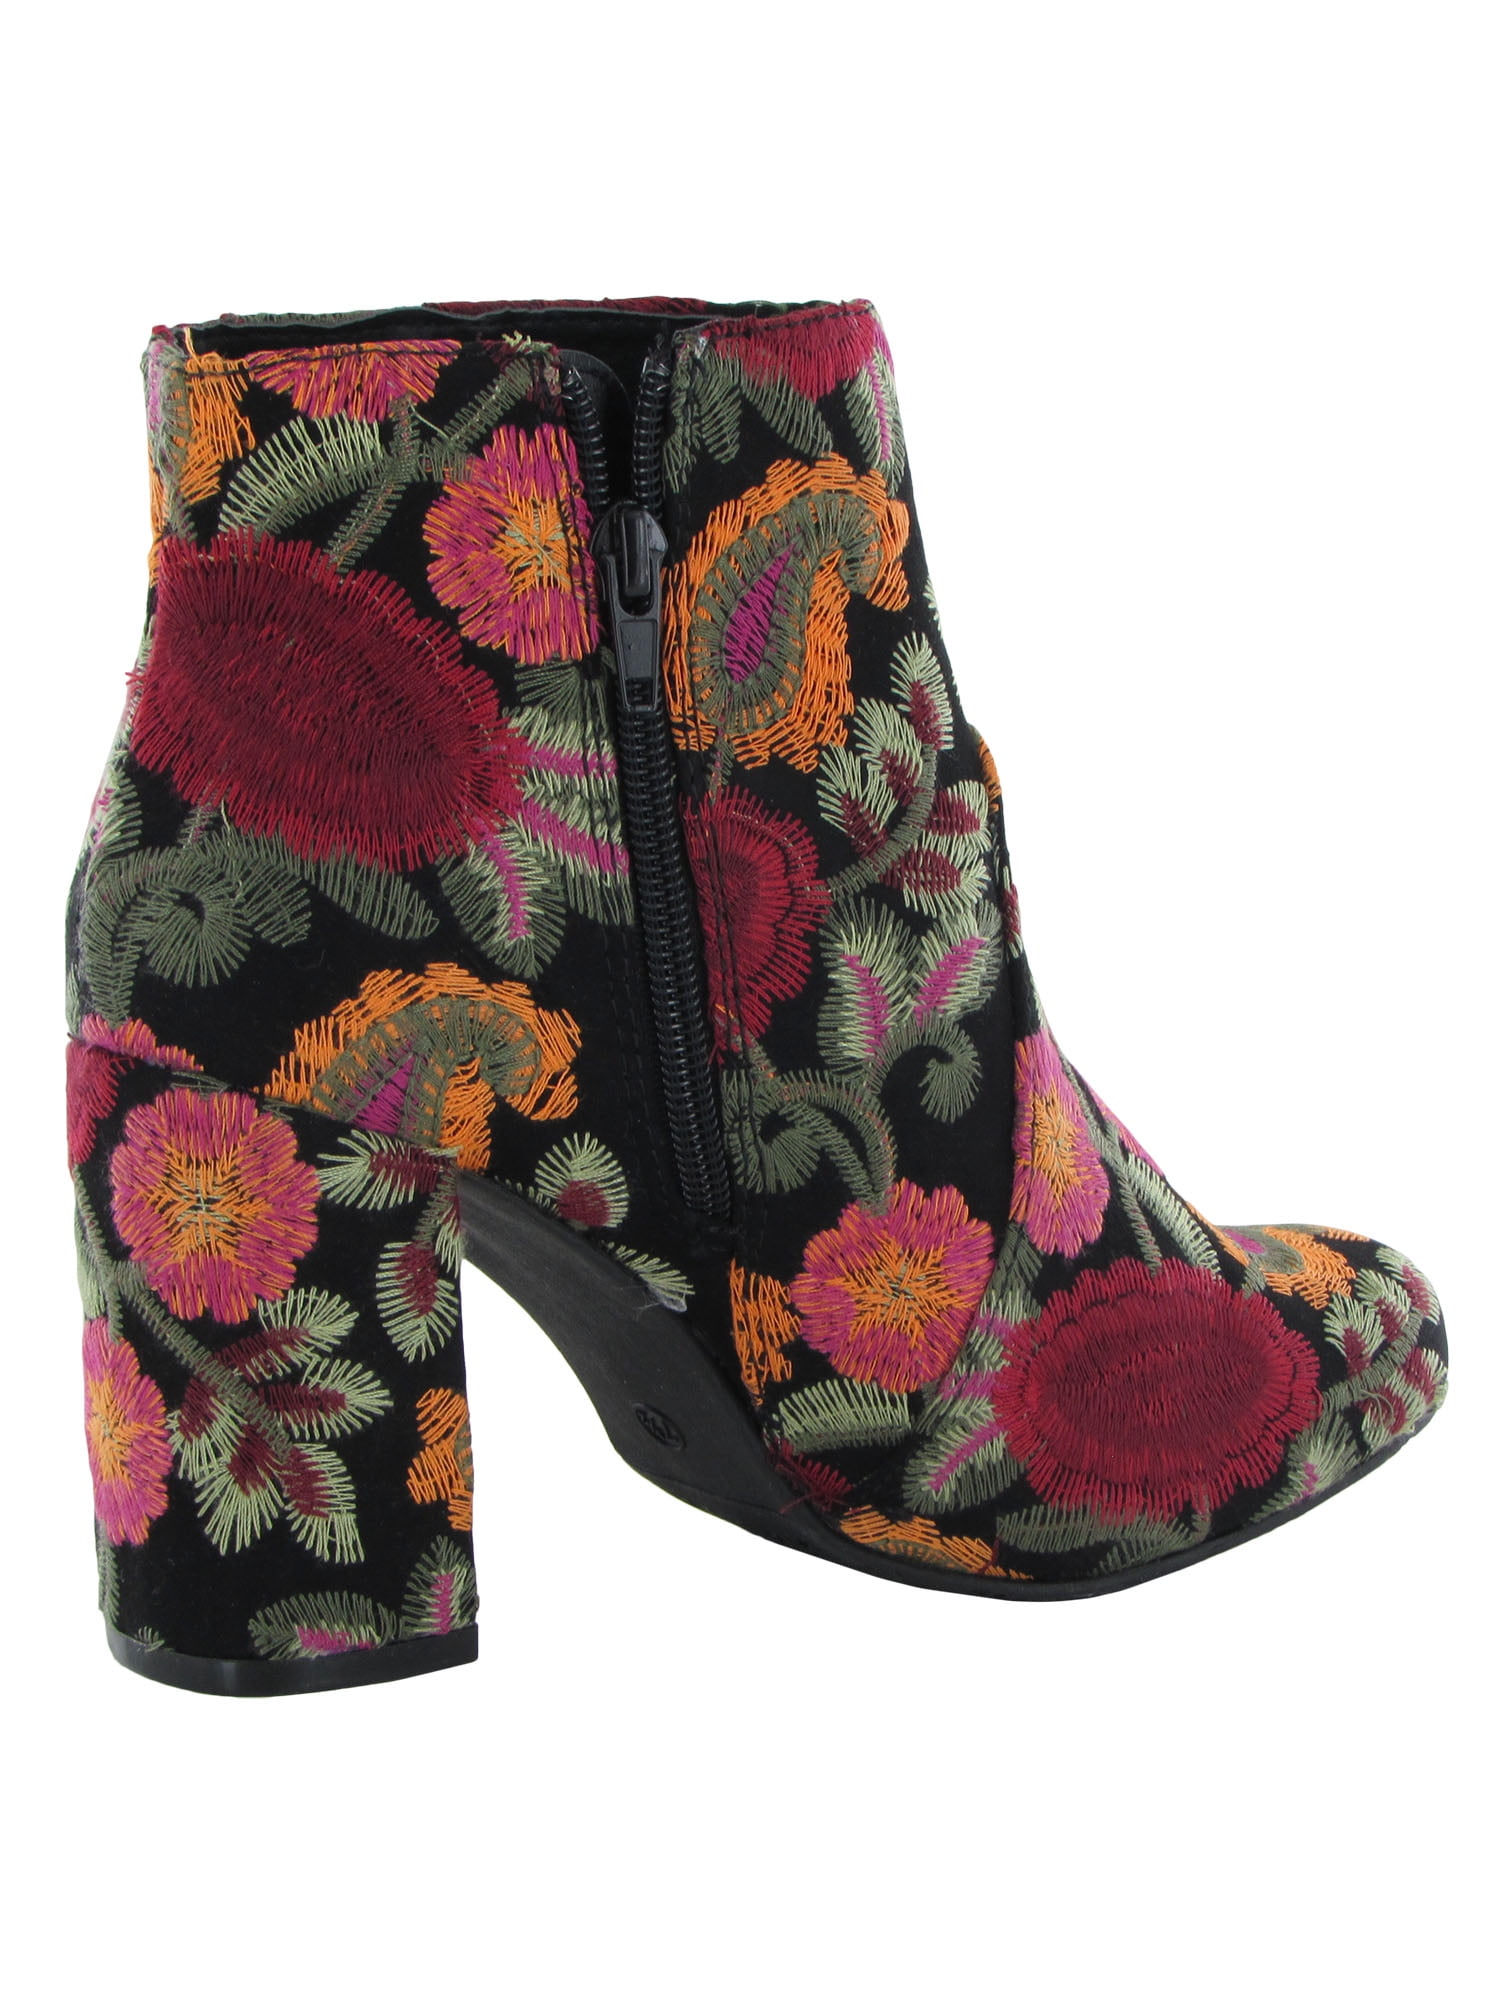 mia vail embroidered ankle boot